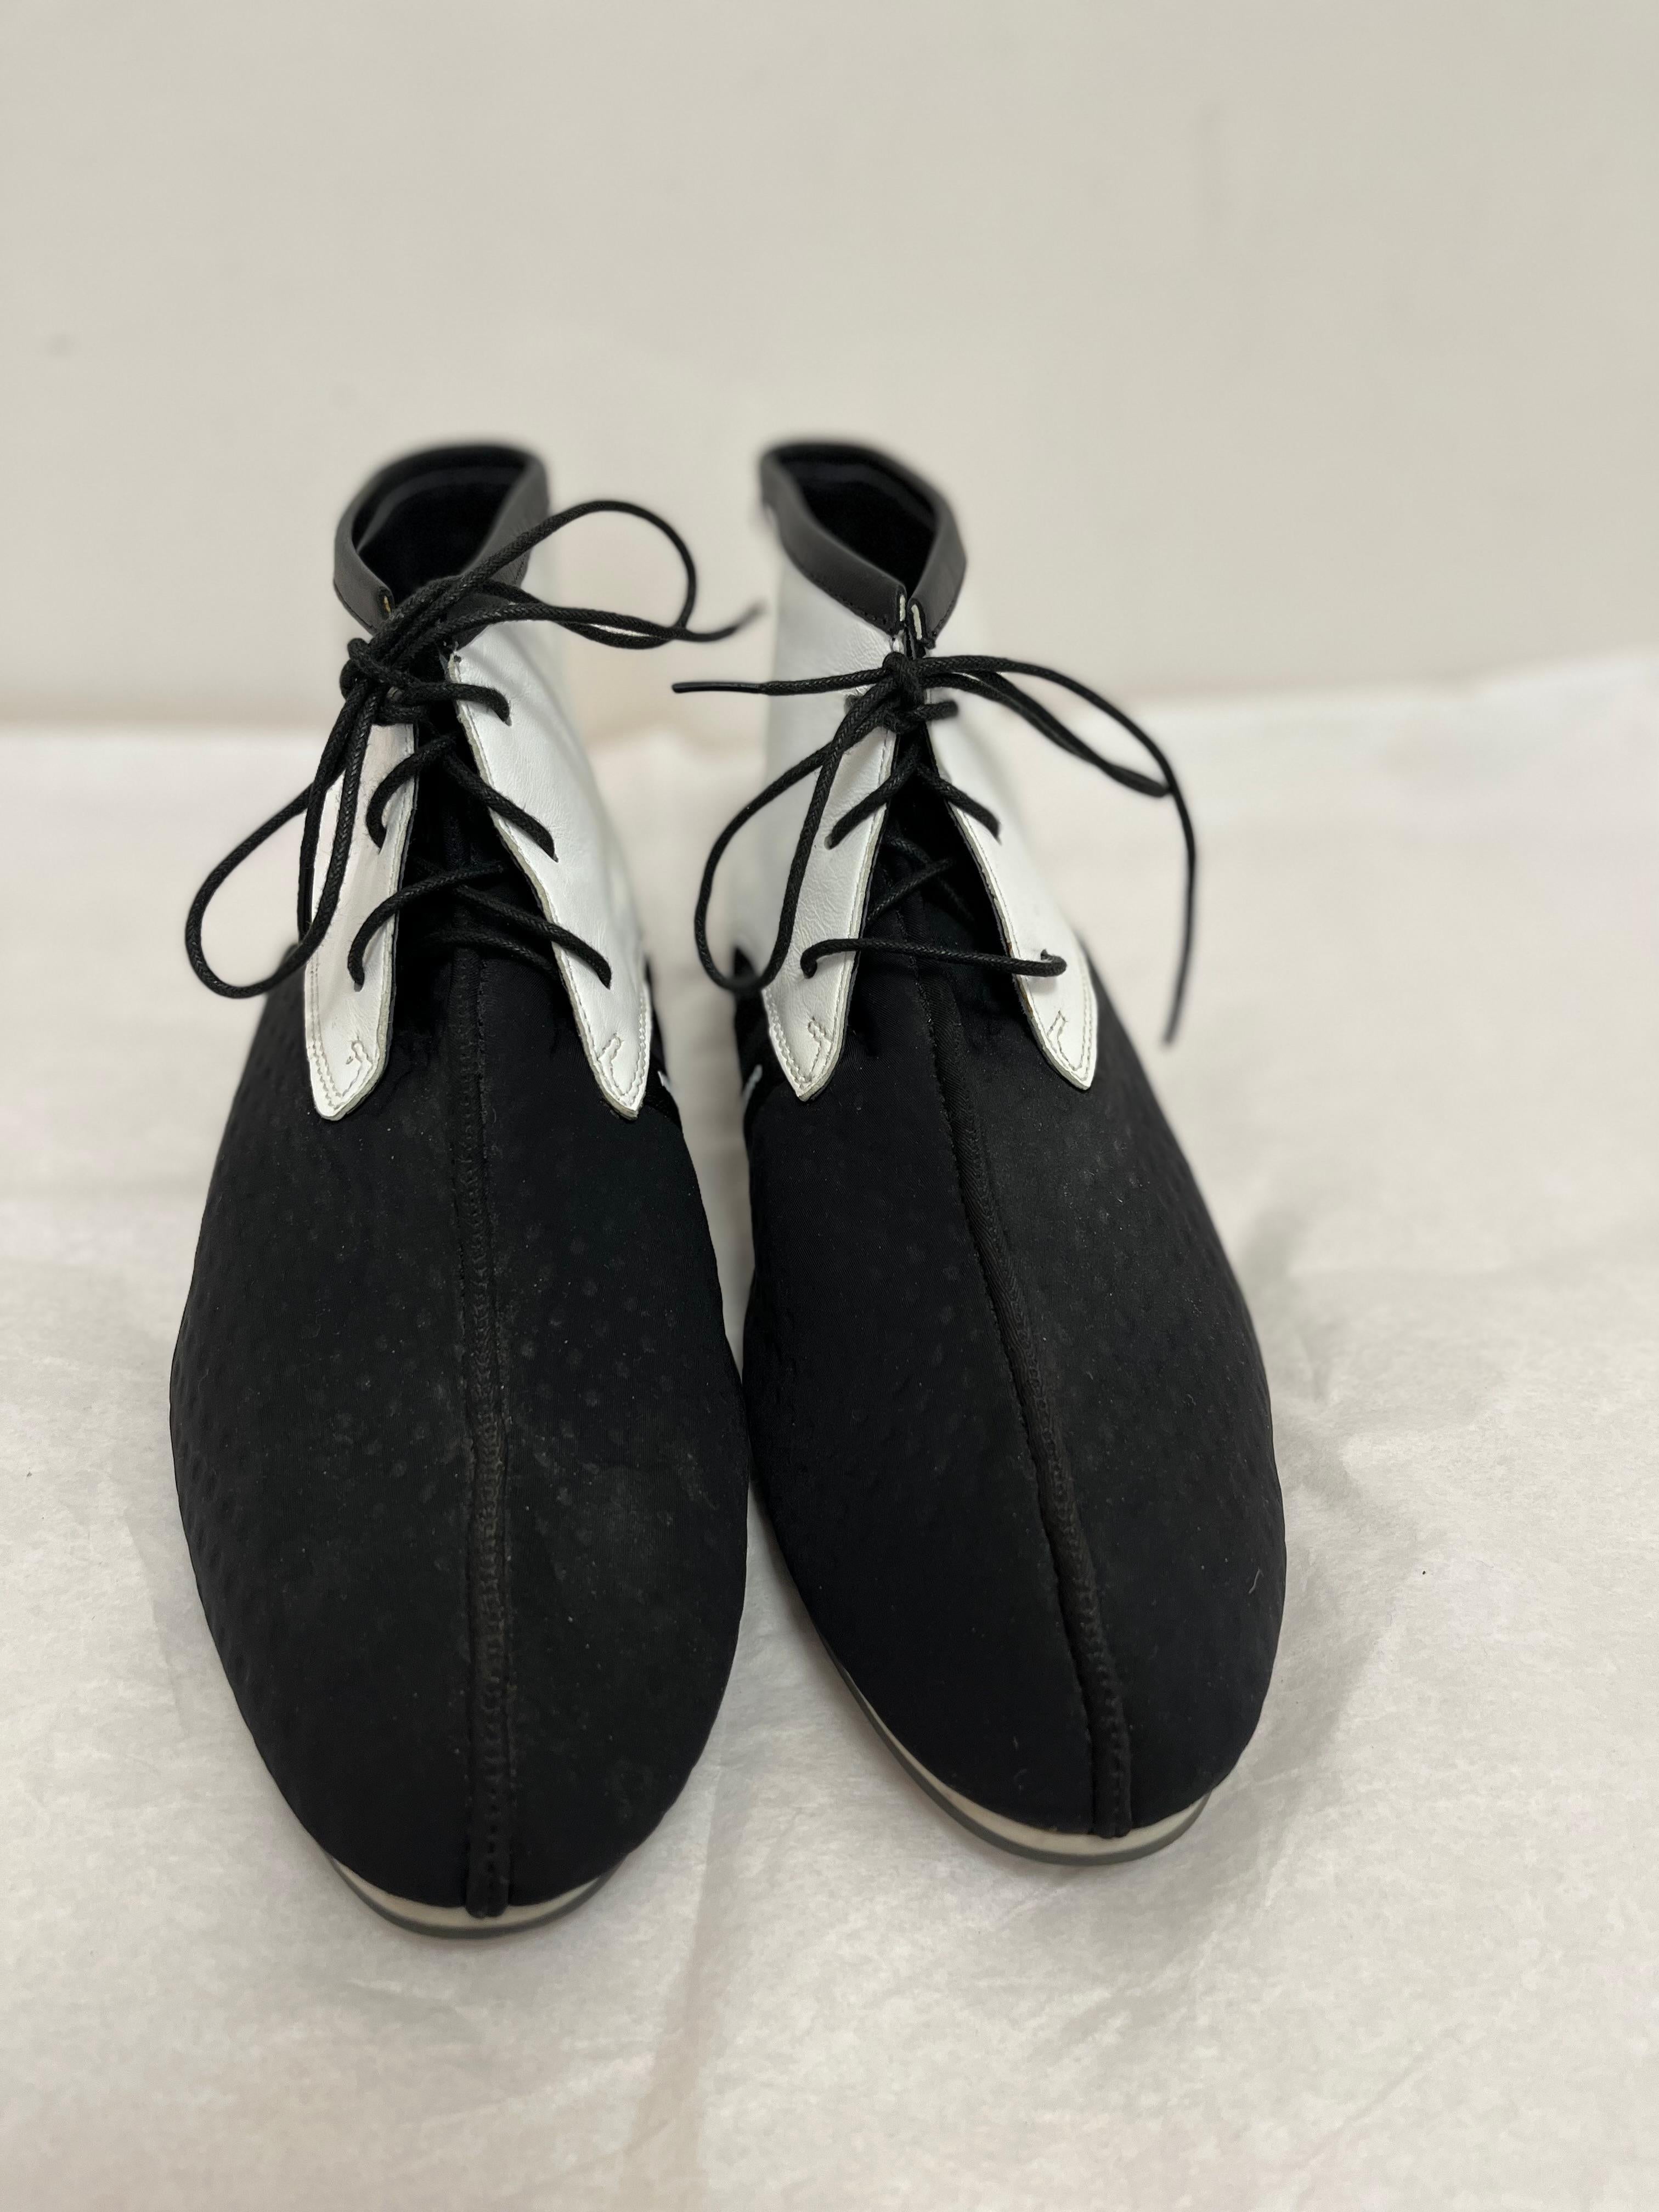 These Yohji Yamamoto leather and neoprene booties are hard to find, and where a collaboration with Adidas. The white top part is leather, and rest black neoprene.

These are lace up booties, and not sneakers. The little heel is black with white